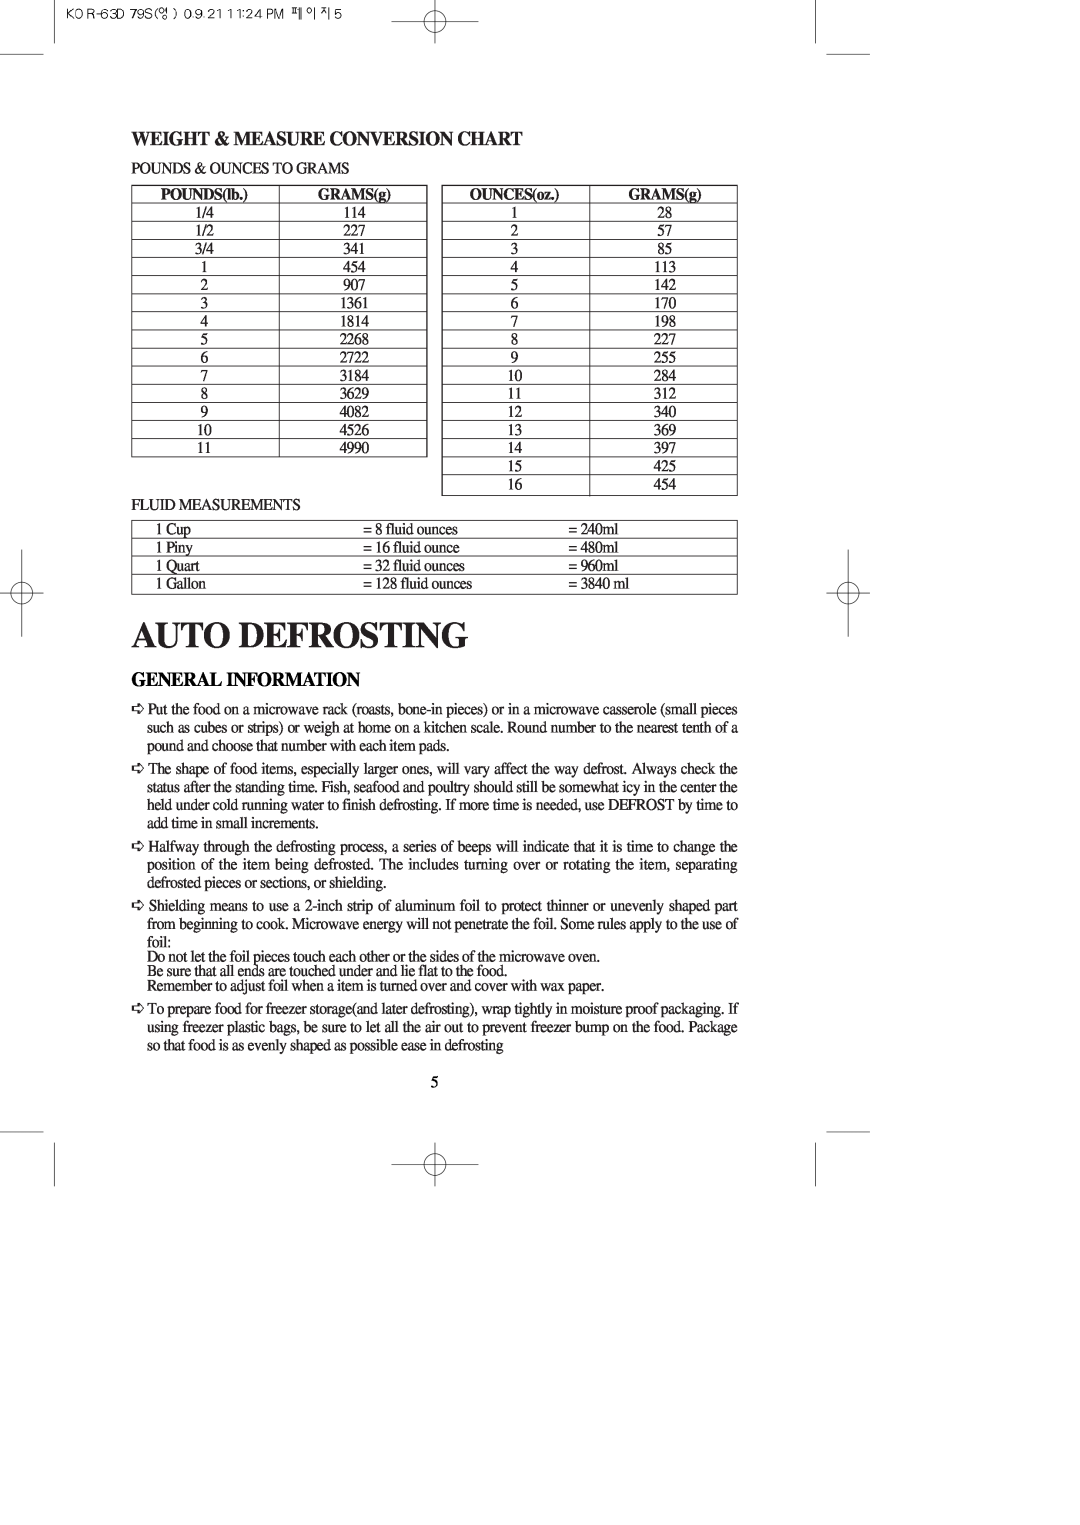 Daewoo KOR-63D79S Auto Defrosting, Weight & Measure Conversion Chart, General Information, POUNDSlb, GRAMSg, OUNCESoz 